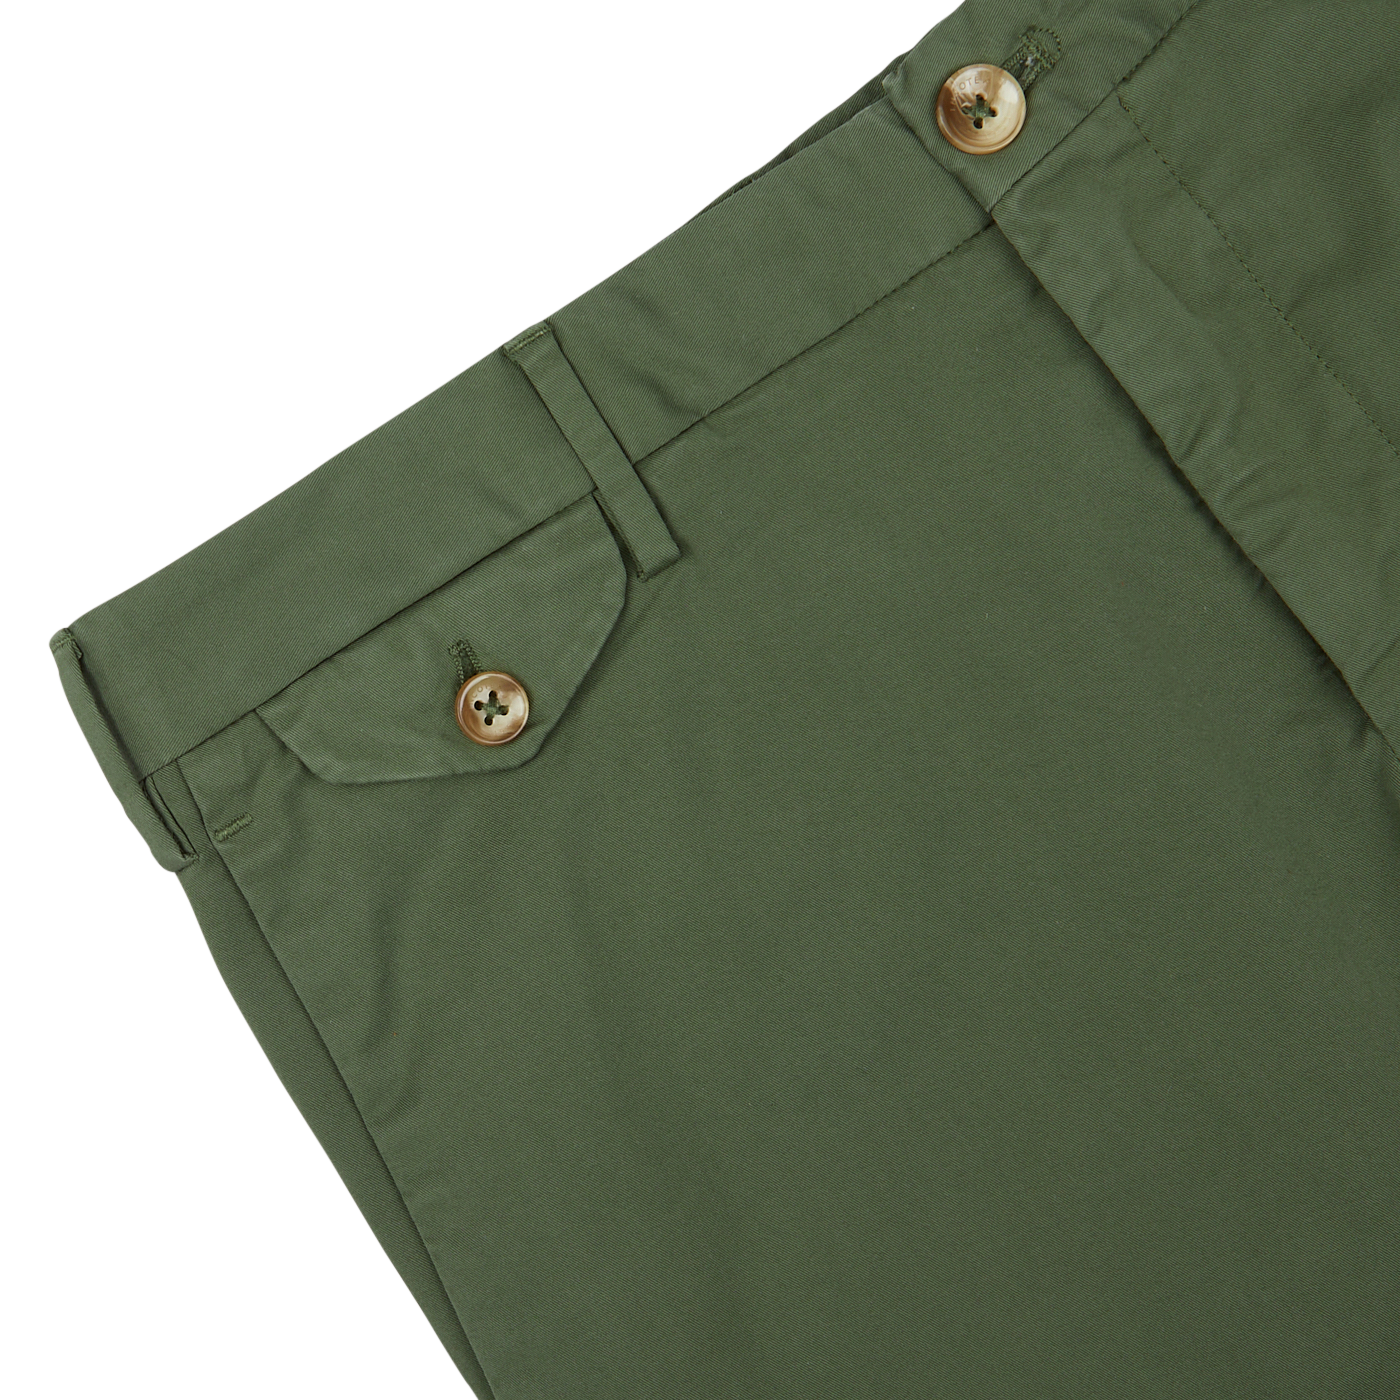 Close-up of Grass Green Cotton Royal Batavia shorts by Incotex with a buttoned pocket detail.